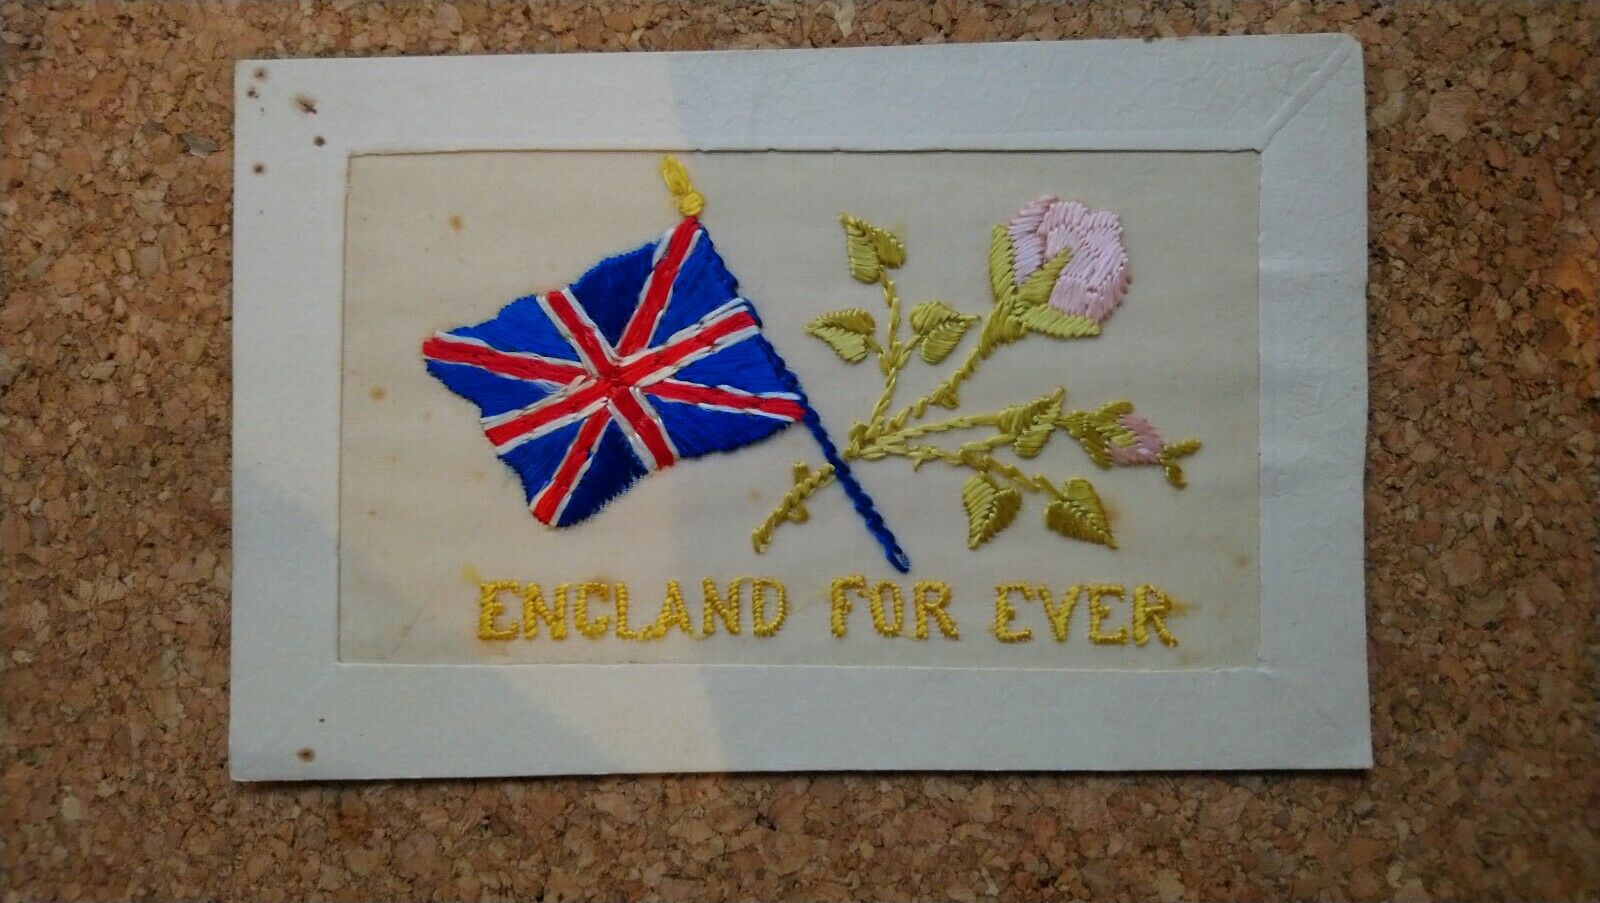 House Clearance - Vintage WW1 Silk Embroidered Service. England for ever.